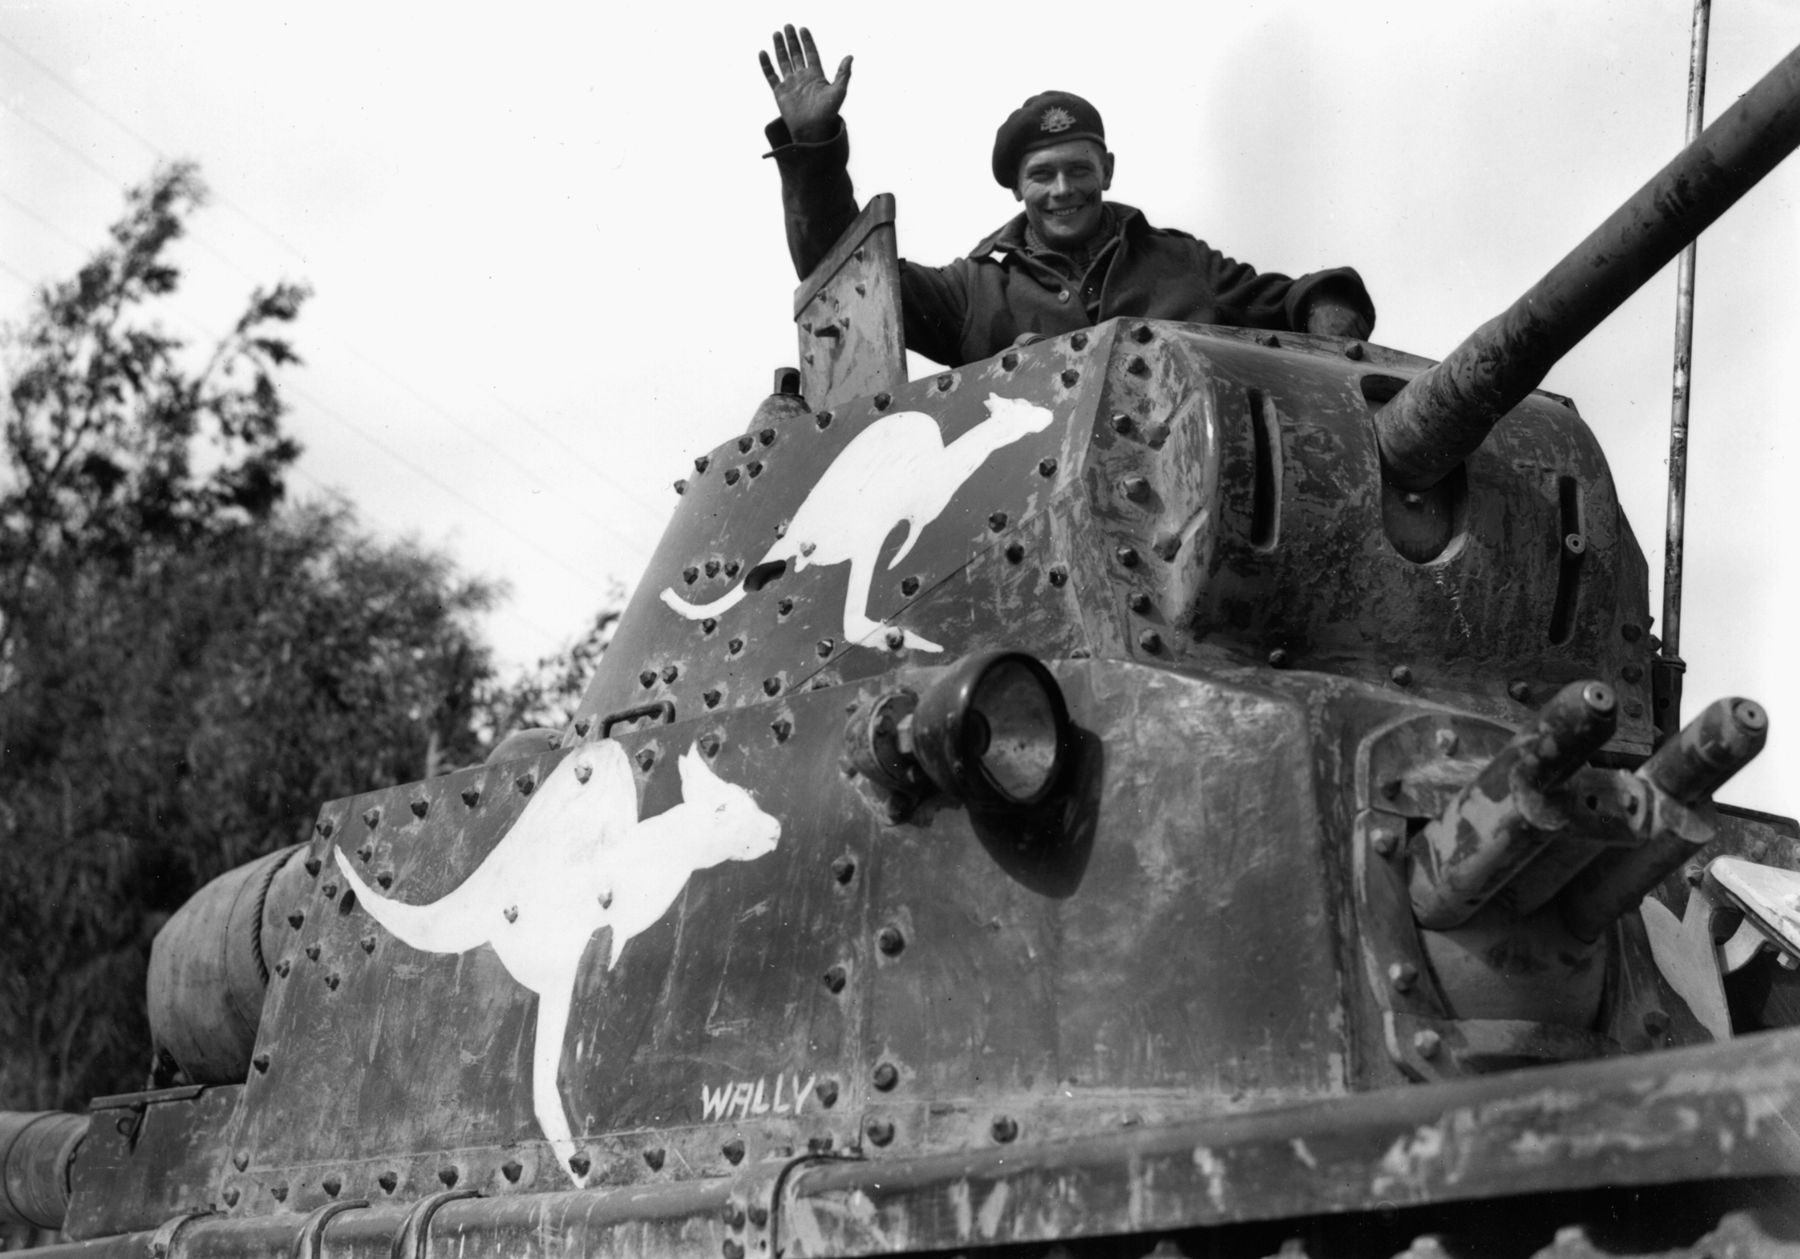 An Australian tanker waves from the turret of an Italian M13/40 light tank captured by the 6th Australian Divisional Cavalry in Cyrenaica, Libya, on March 4, 1941. The kangaroos were painted on the tank to help distinguish friend from foe. 